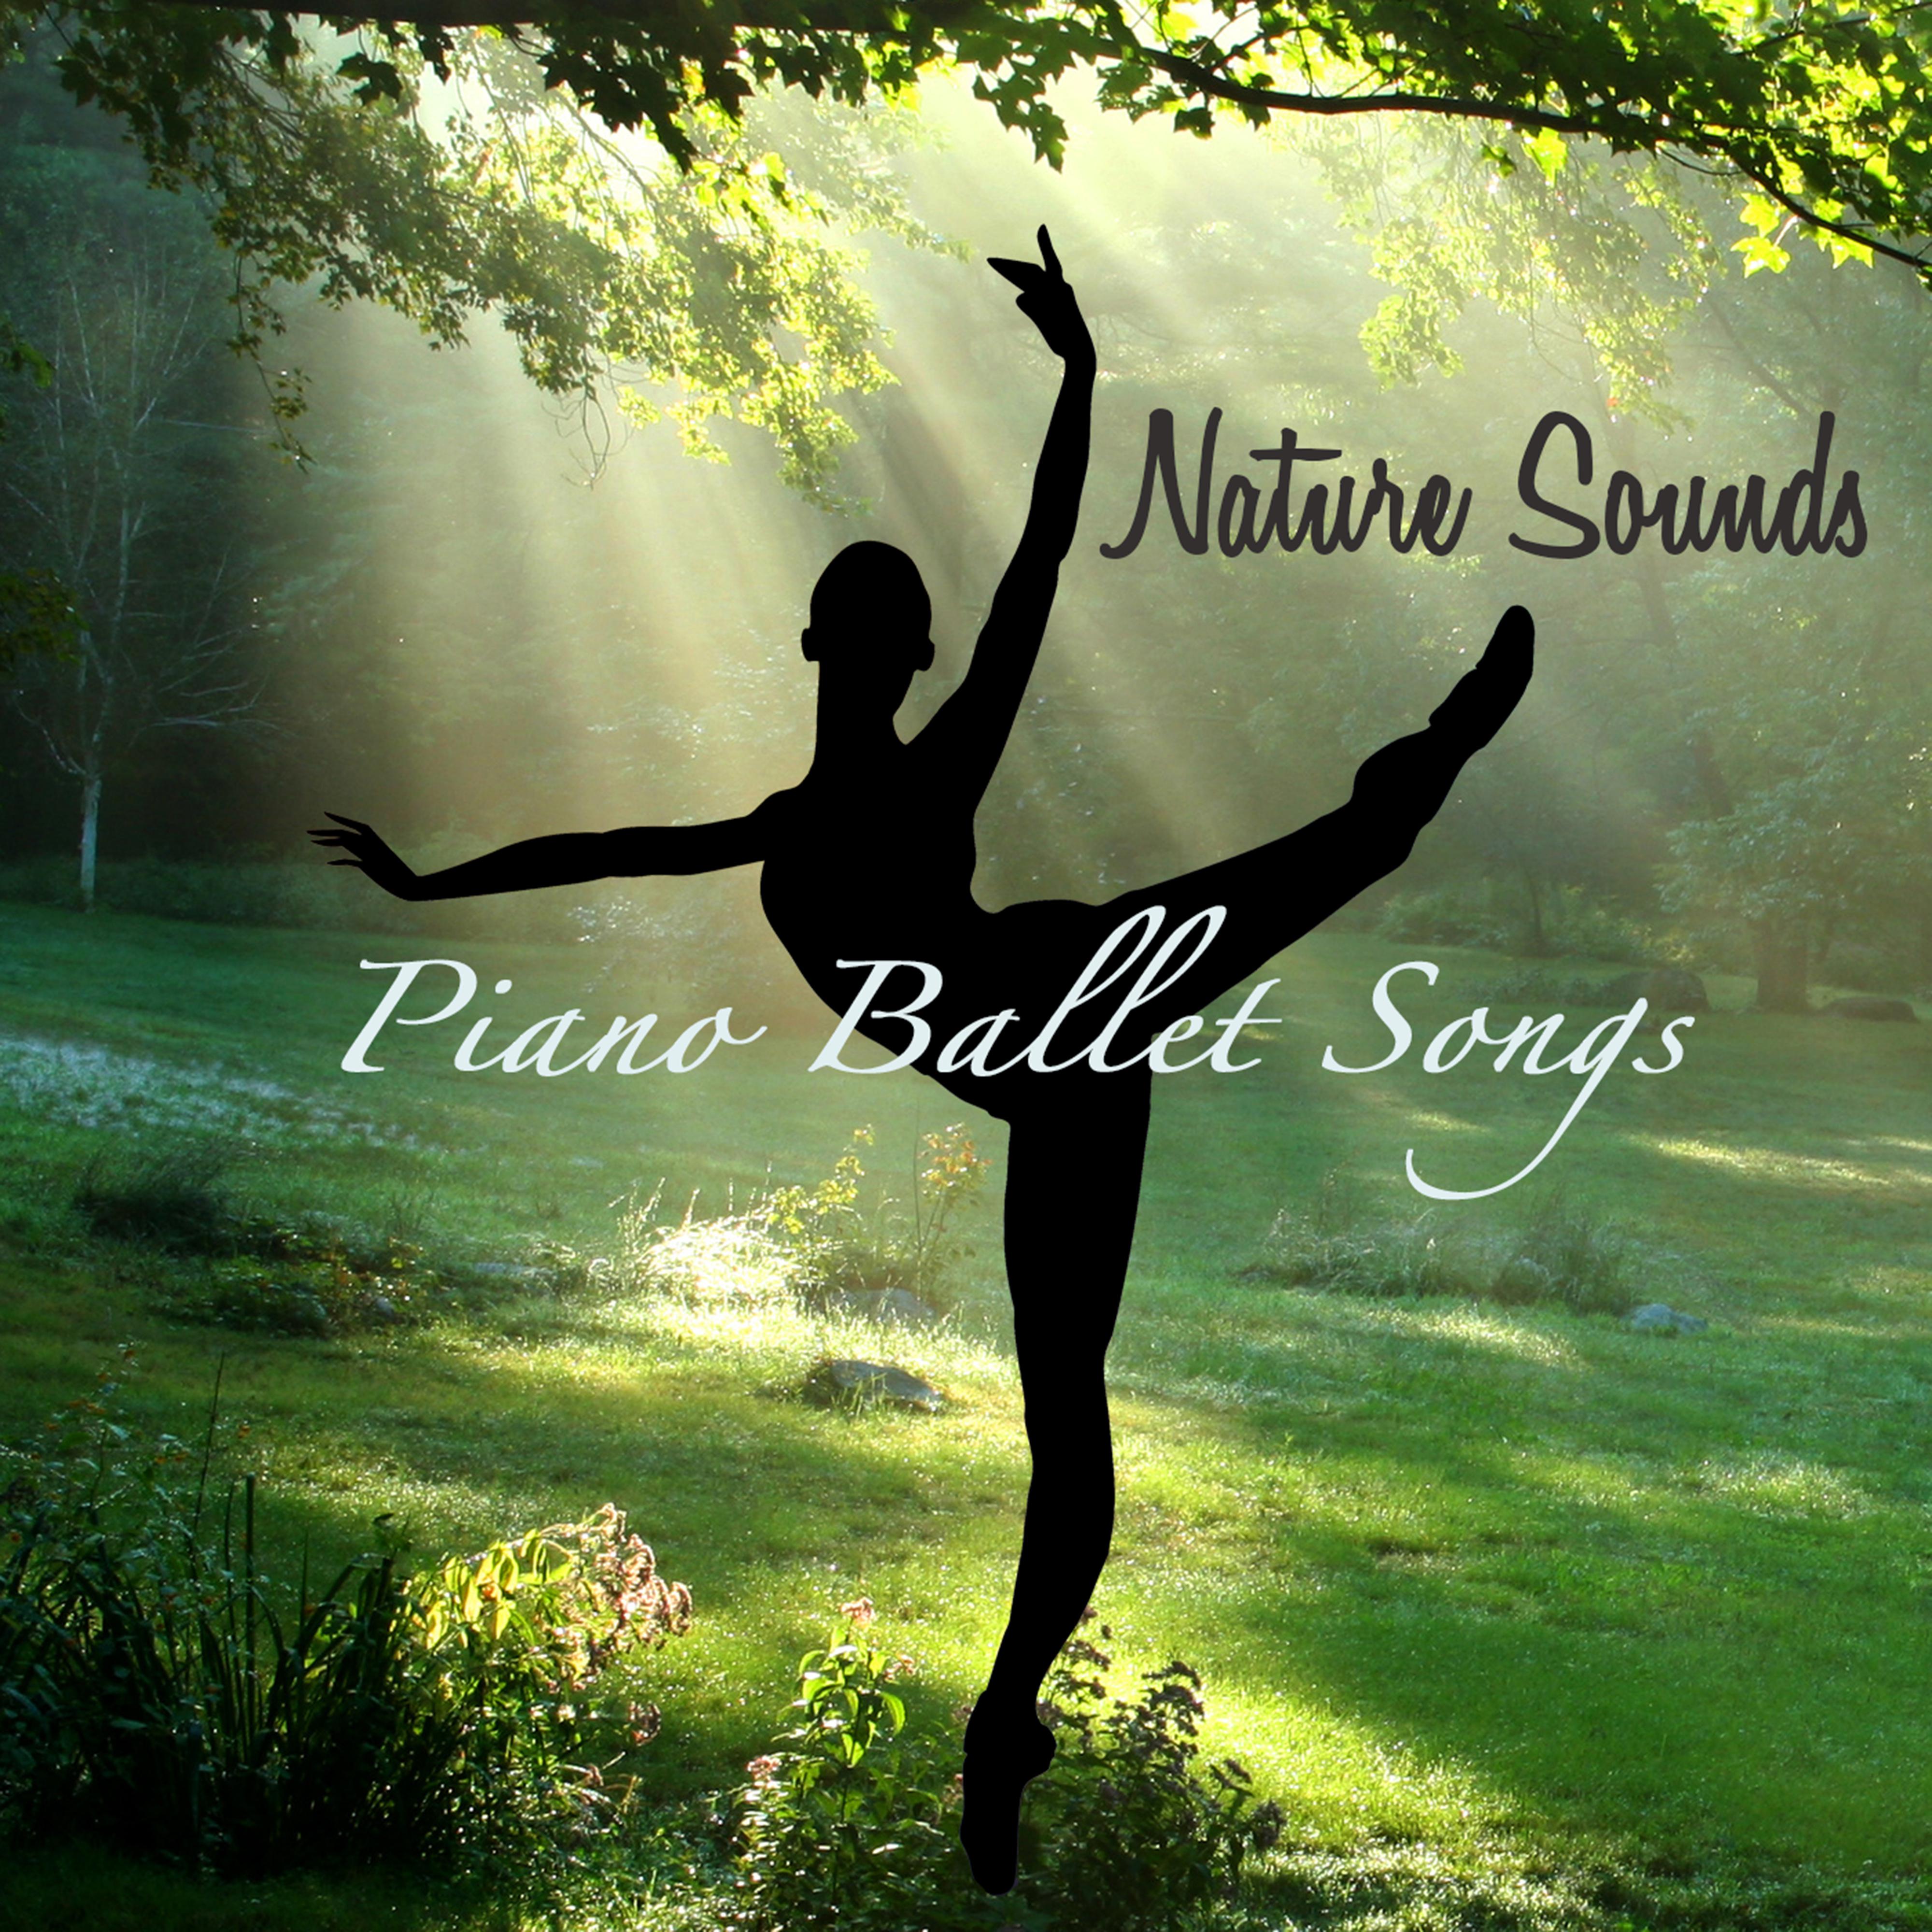 Nature Sounds Piano Ballet Songs  Inspirational Ballet Class Music With Soothing Sounds of Nature